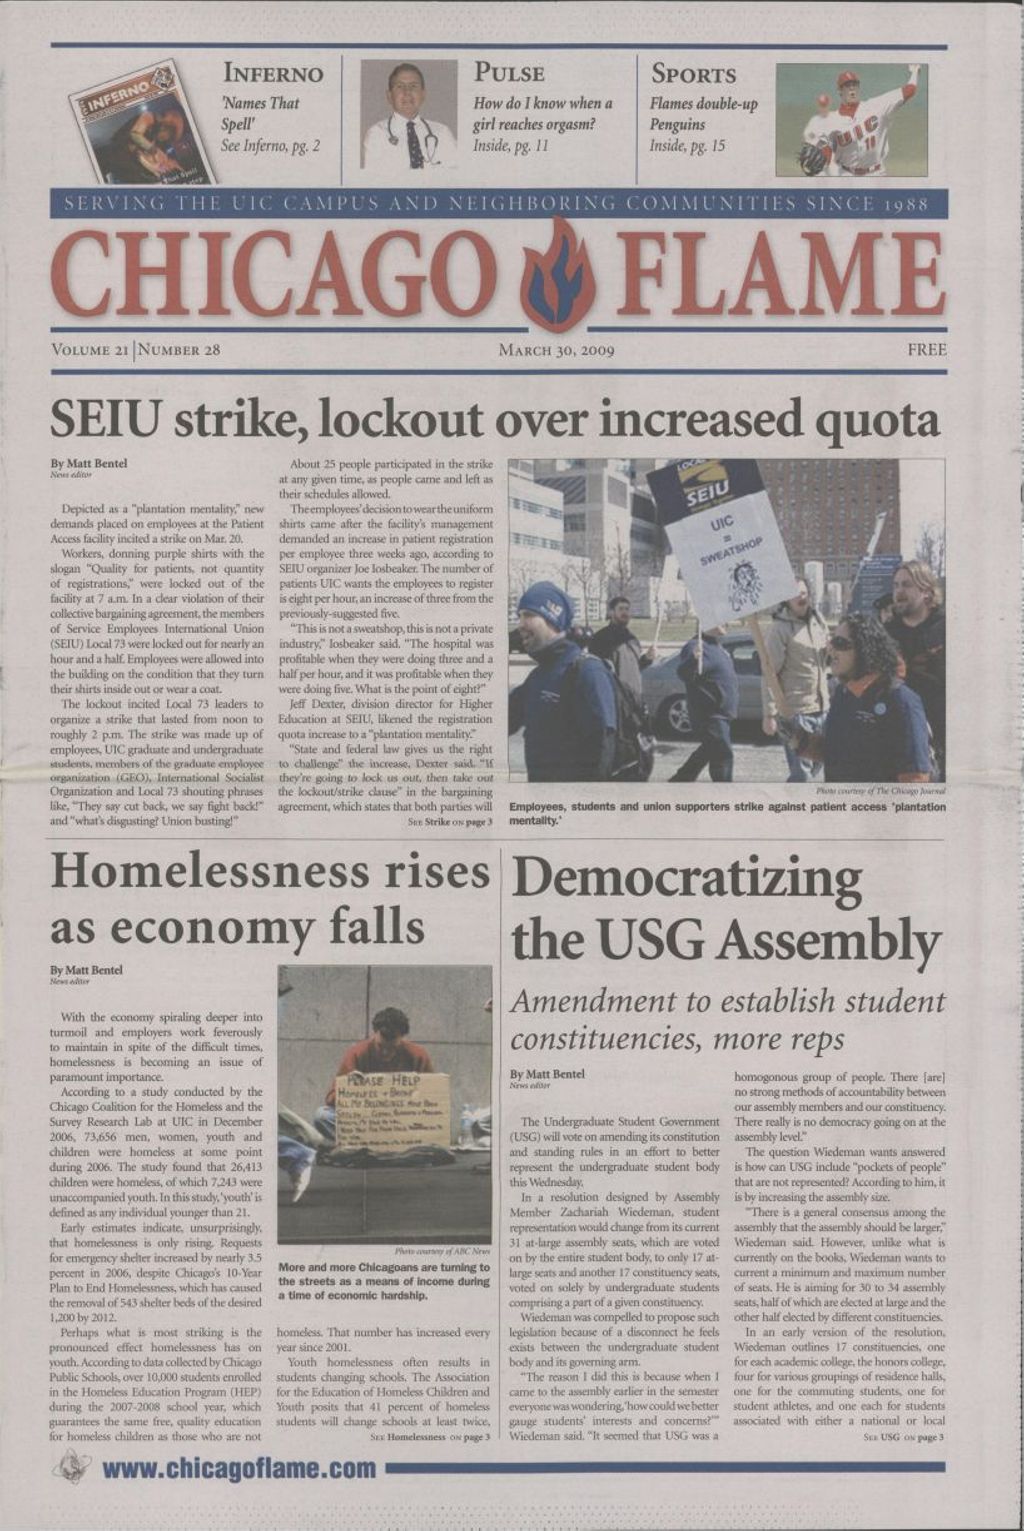 Chicago Flame (March 30, 2009)